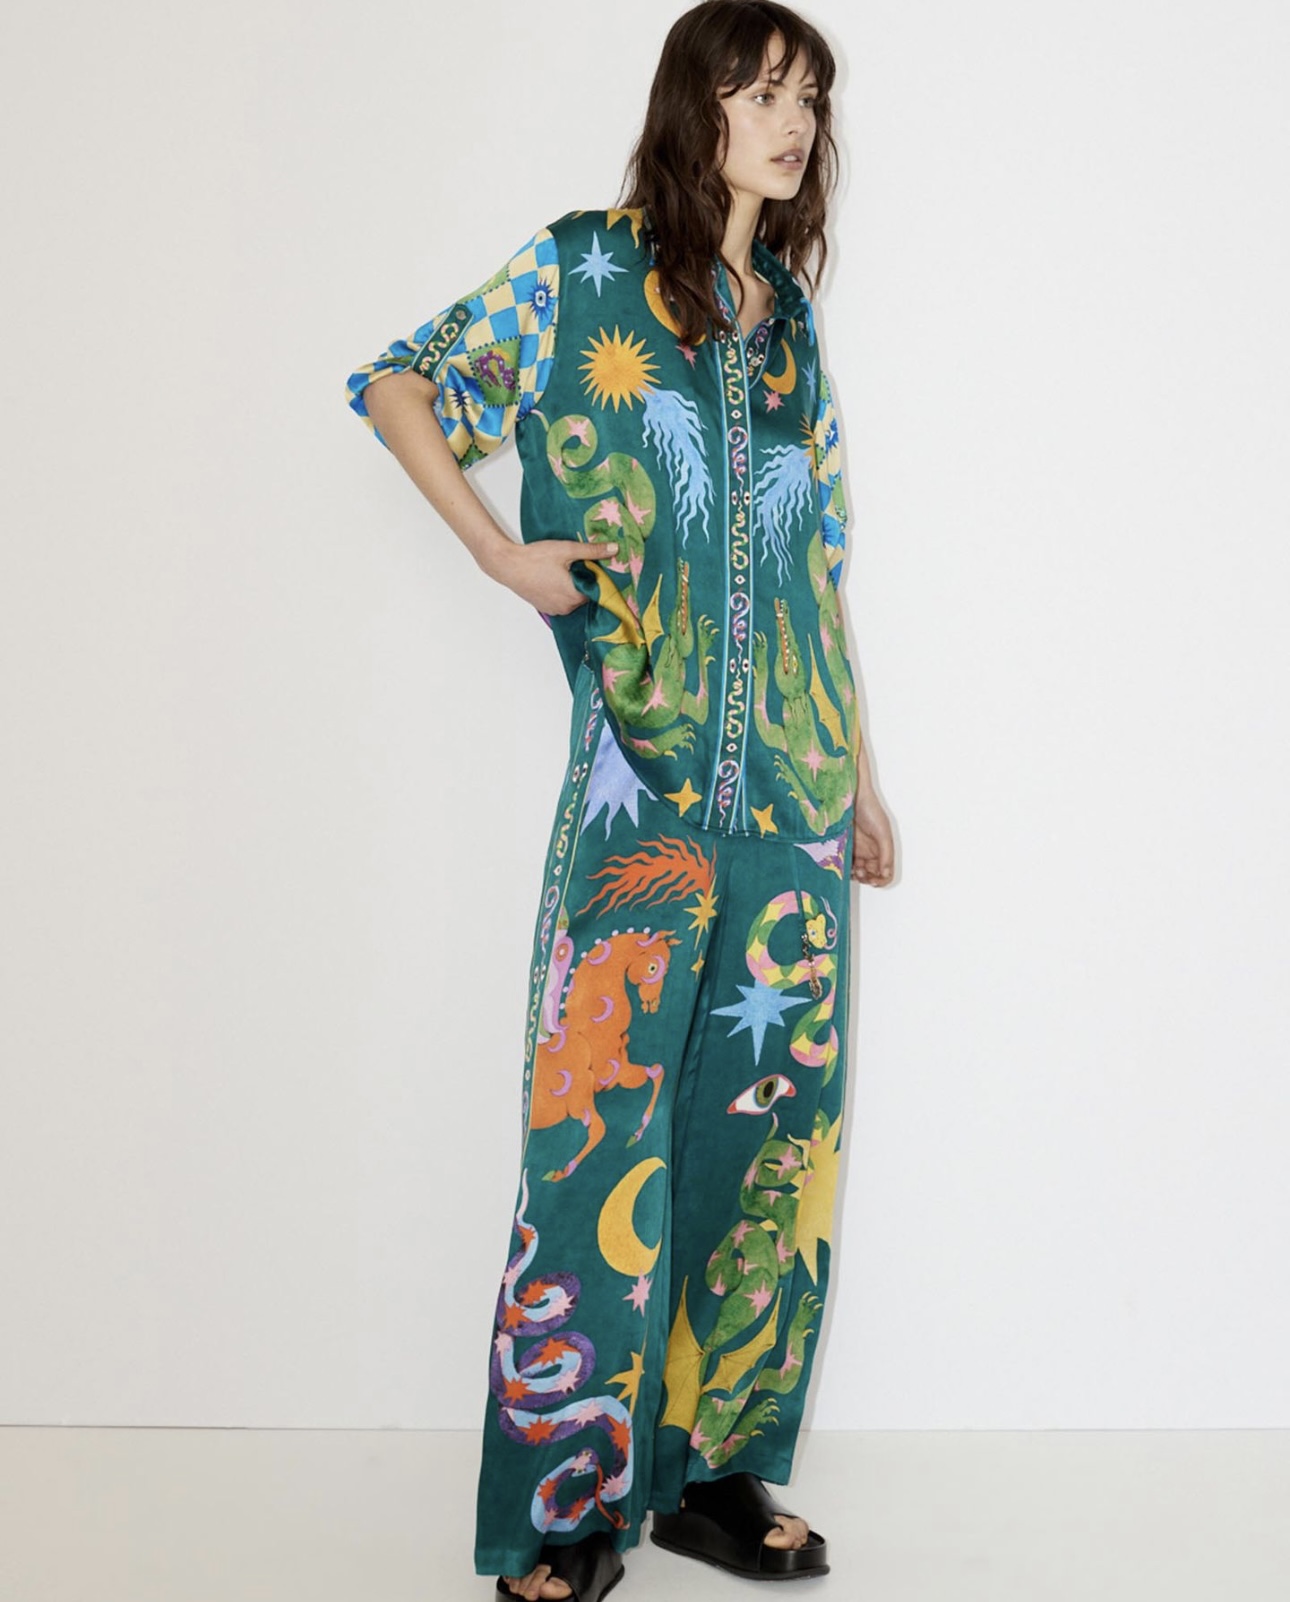 Alemais Guardian Oversized Shirt and Pants. Green relaxed suit set with print pattern.